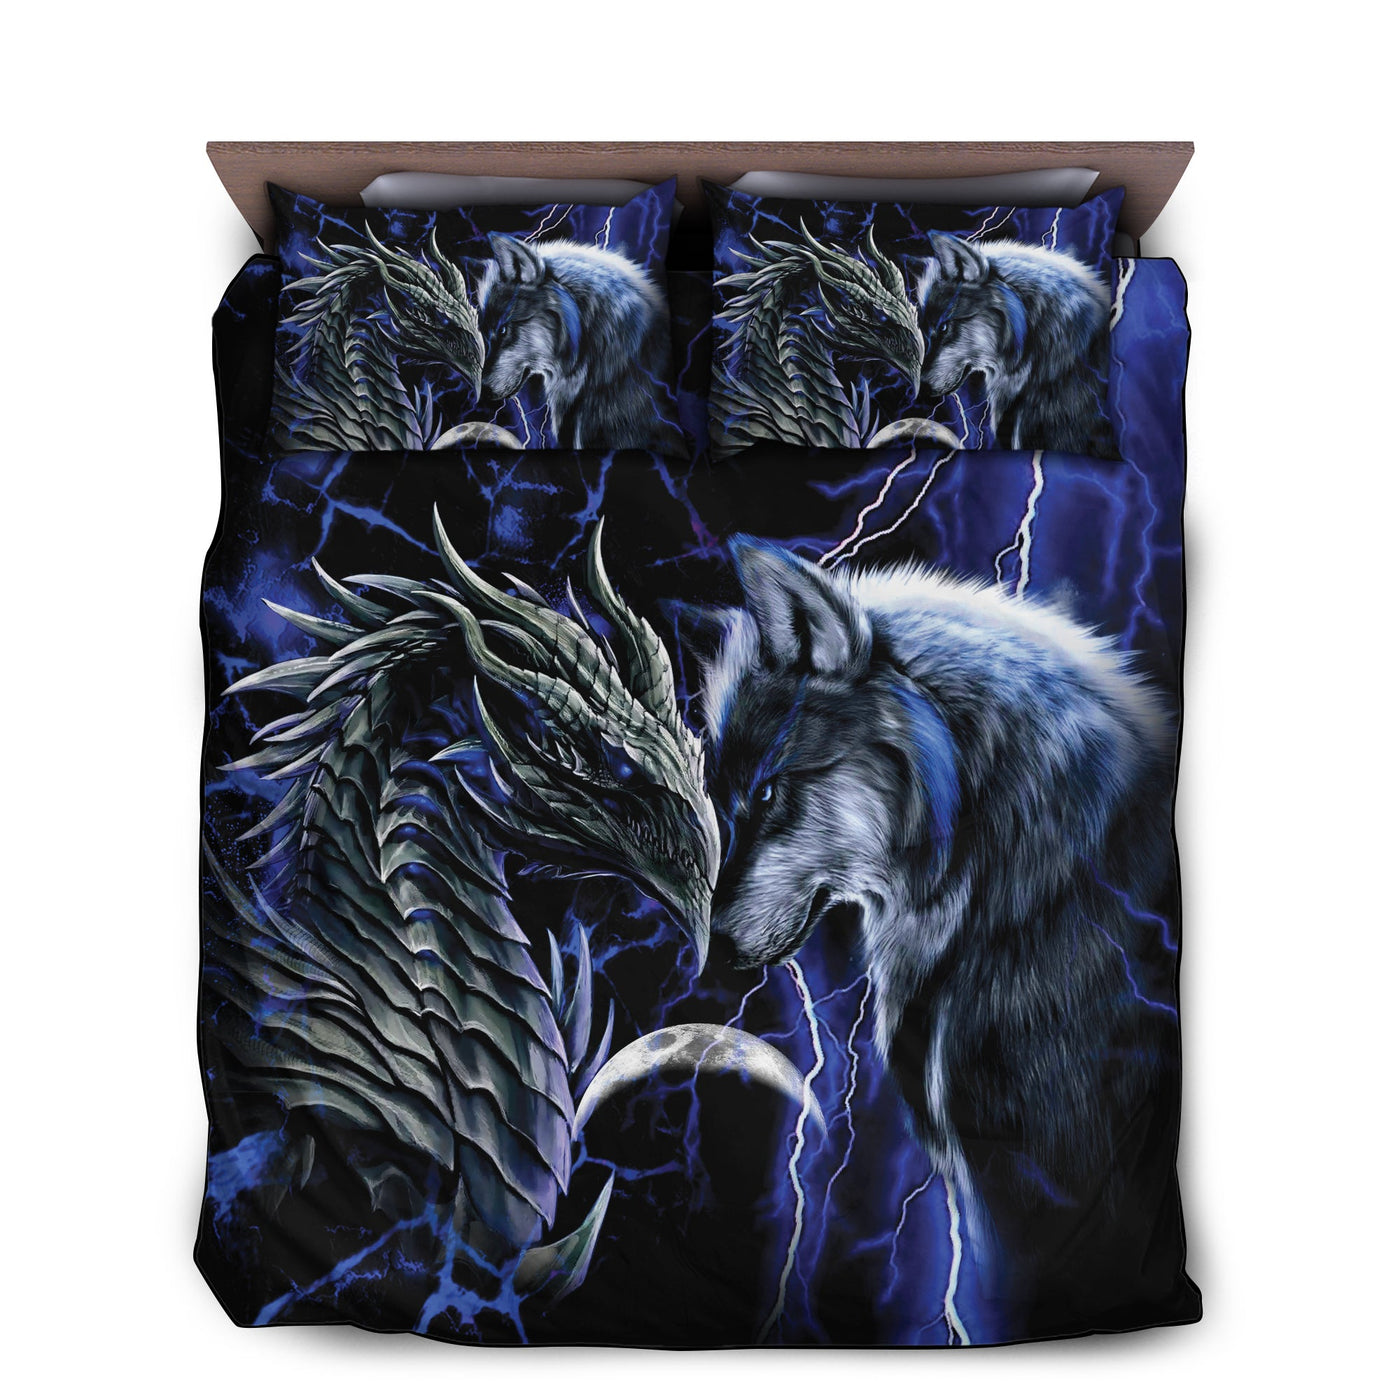 US / Twin (68" x 86") Dragon And Wolf Blue Style - Bedding Cover - Owls Matrix LTD